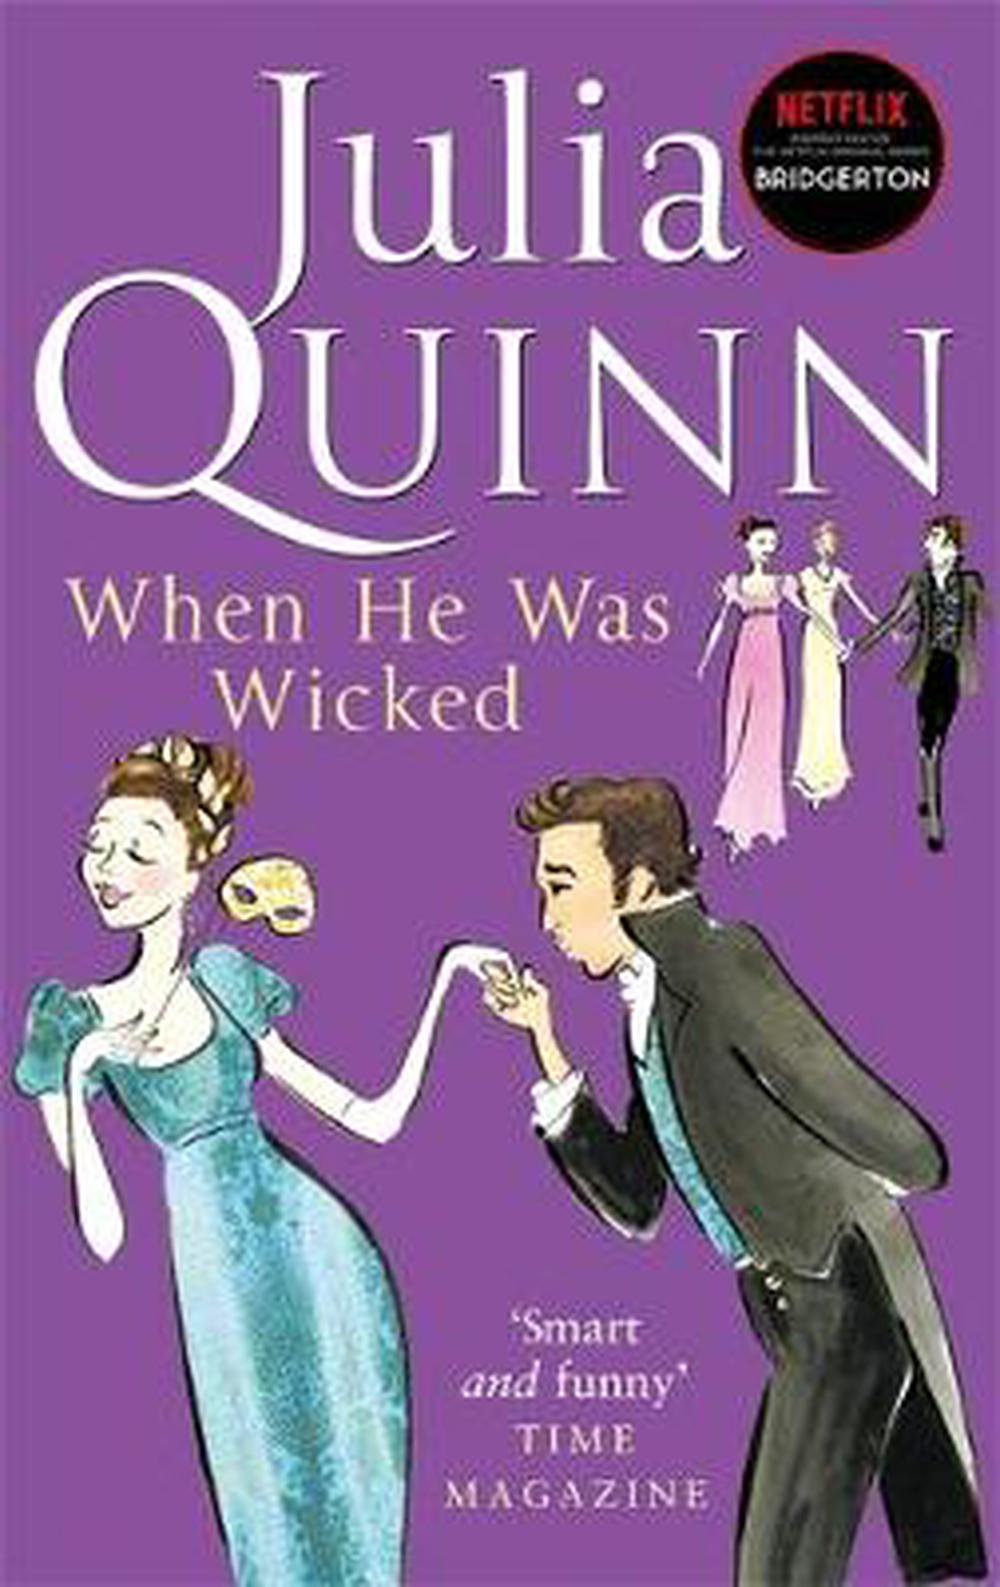 julia quinn when he was wicked summary